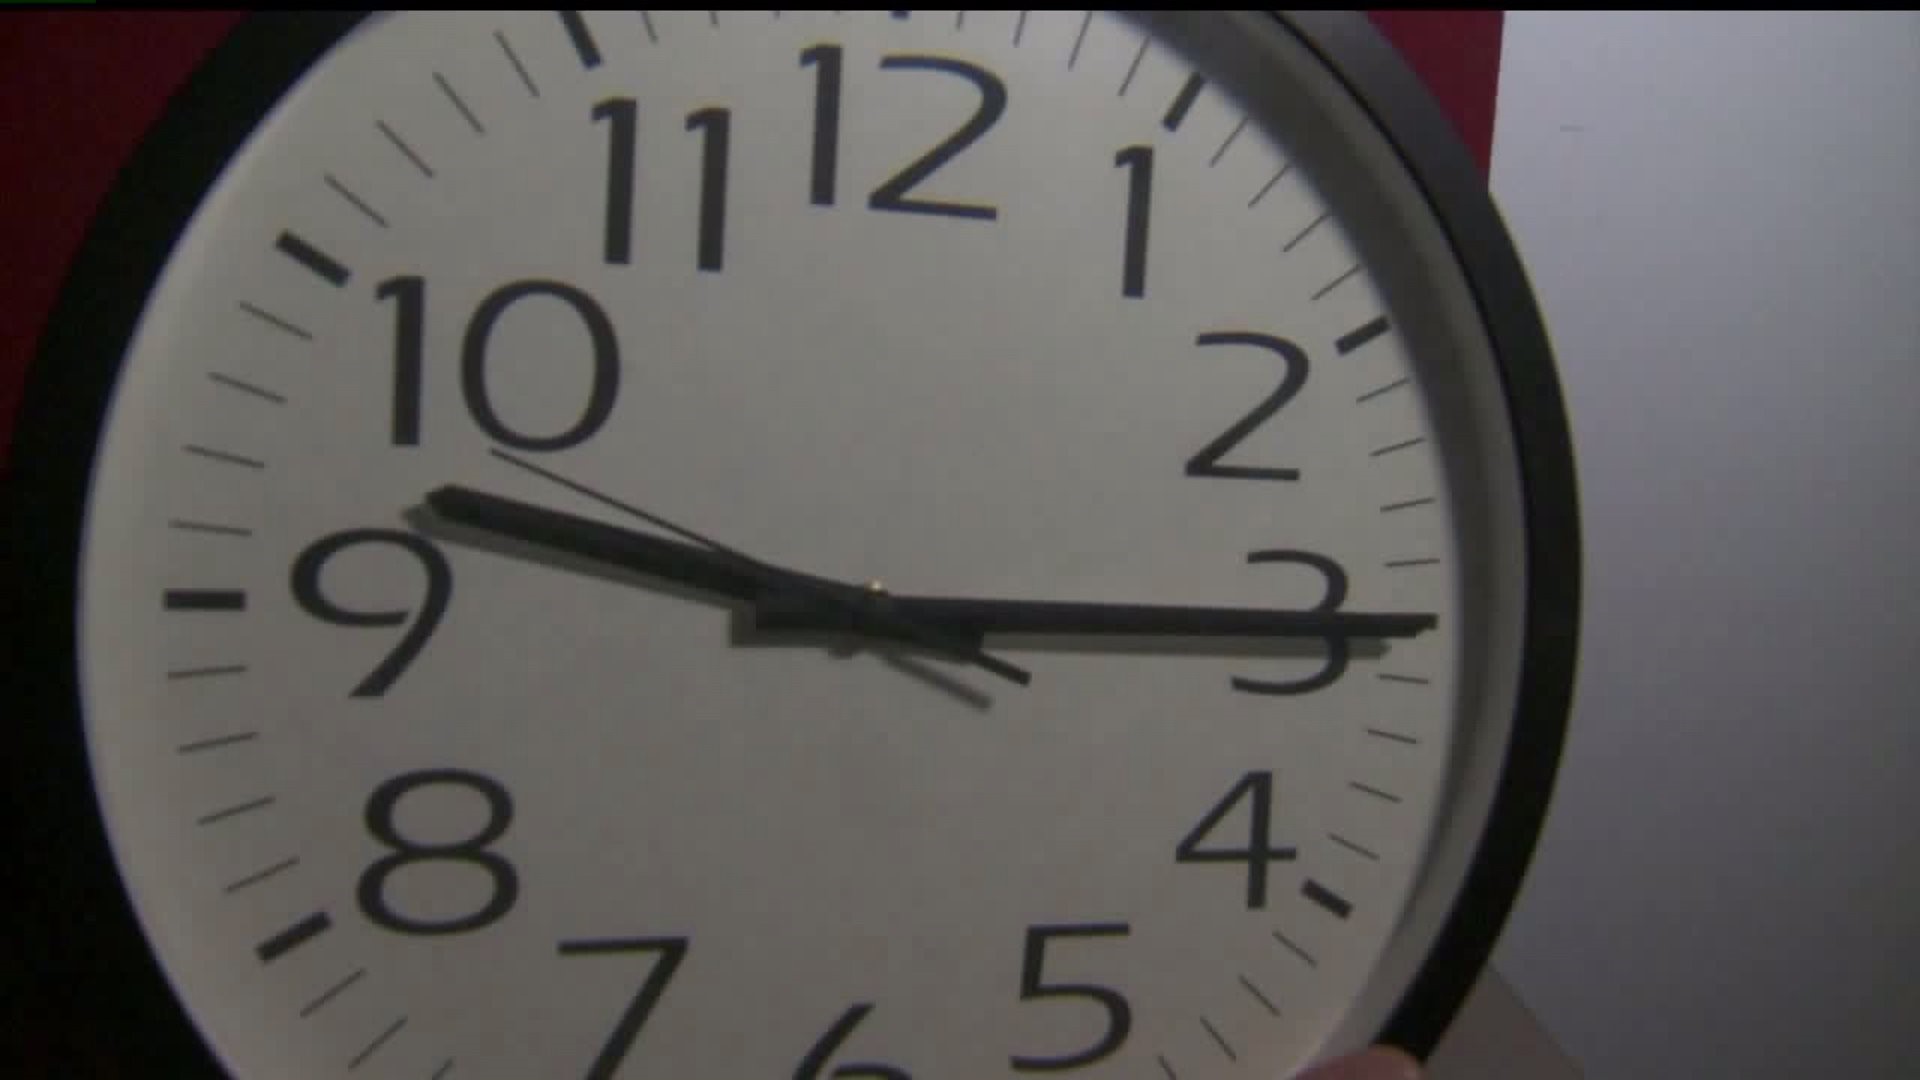 Lights out on Daylight Saving Time? One lawmaker hopes so